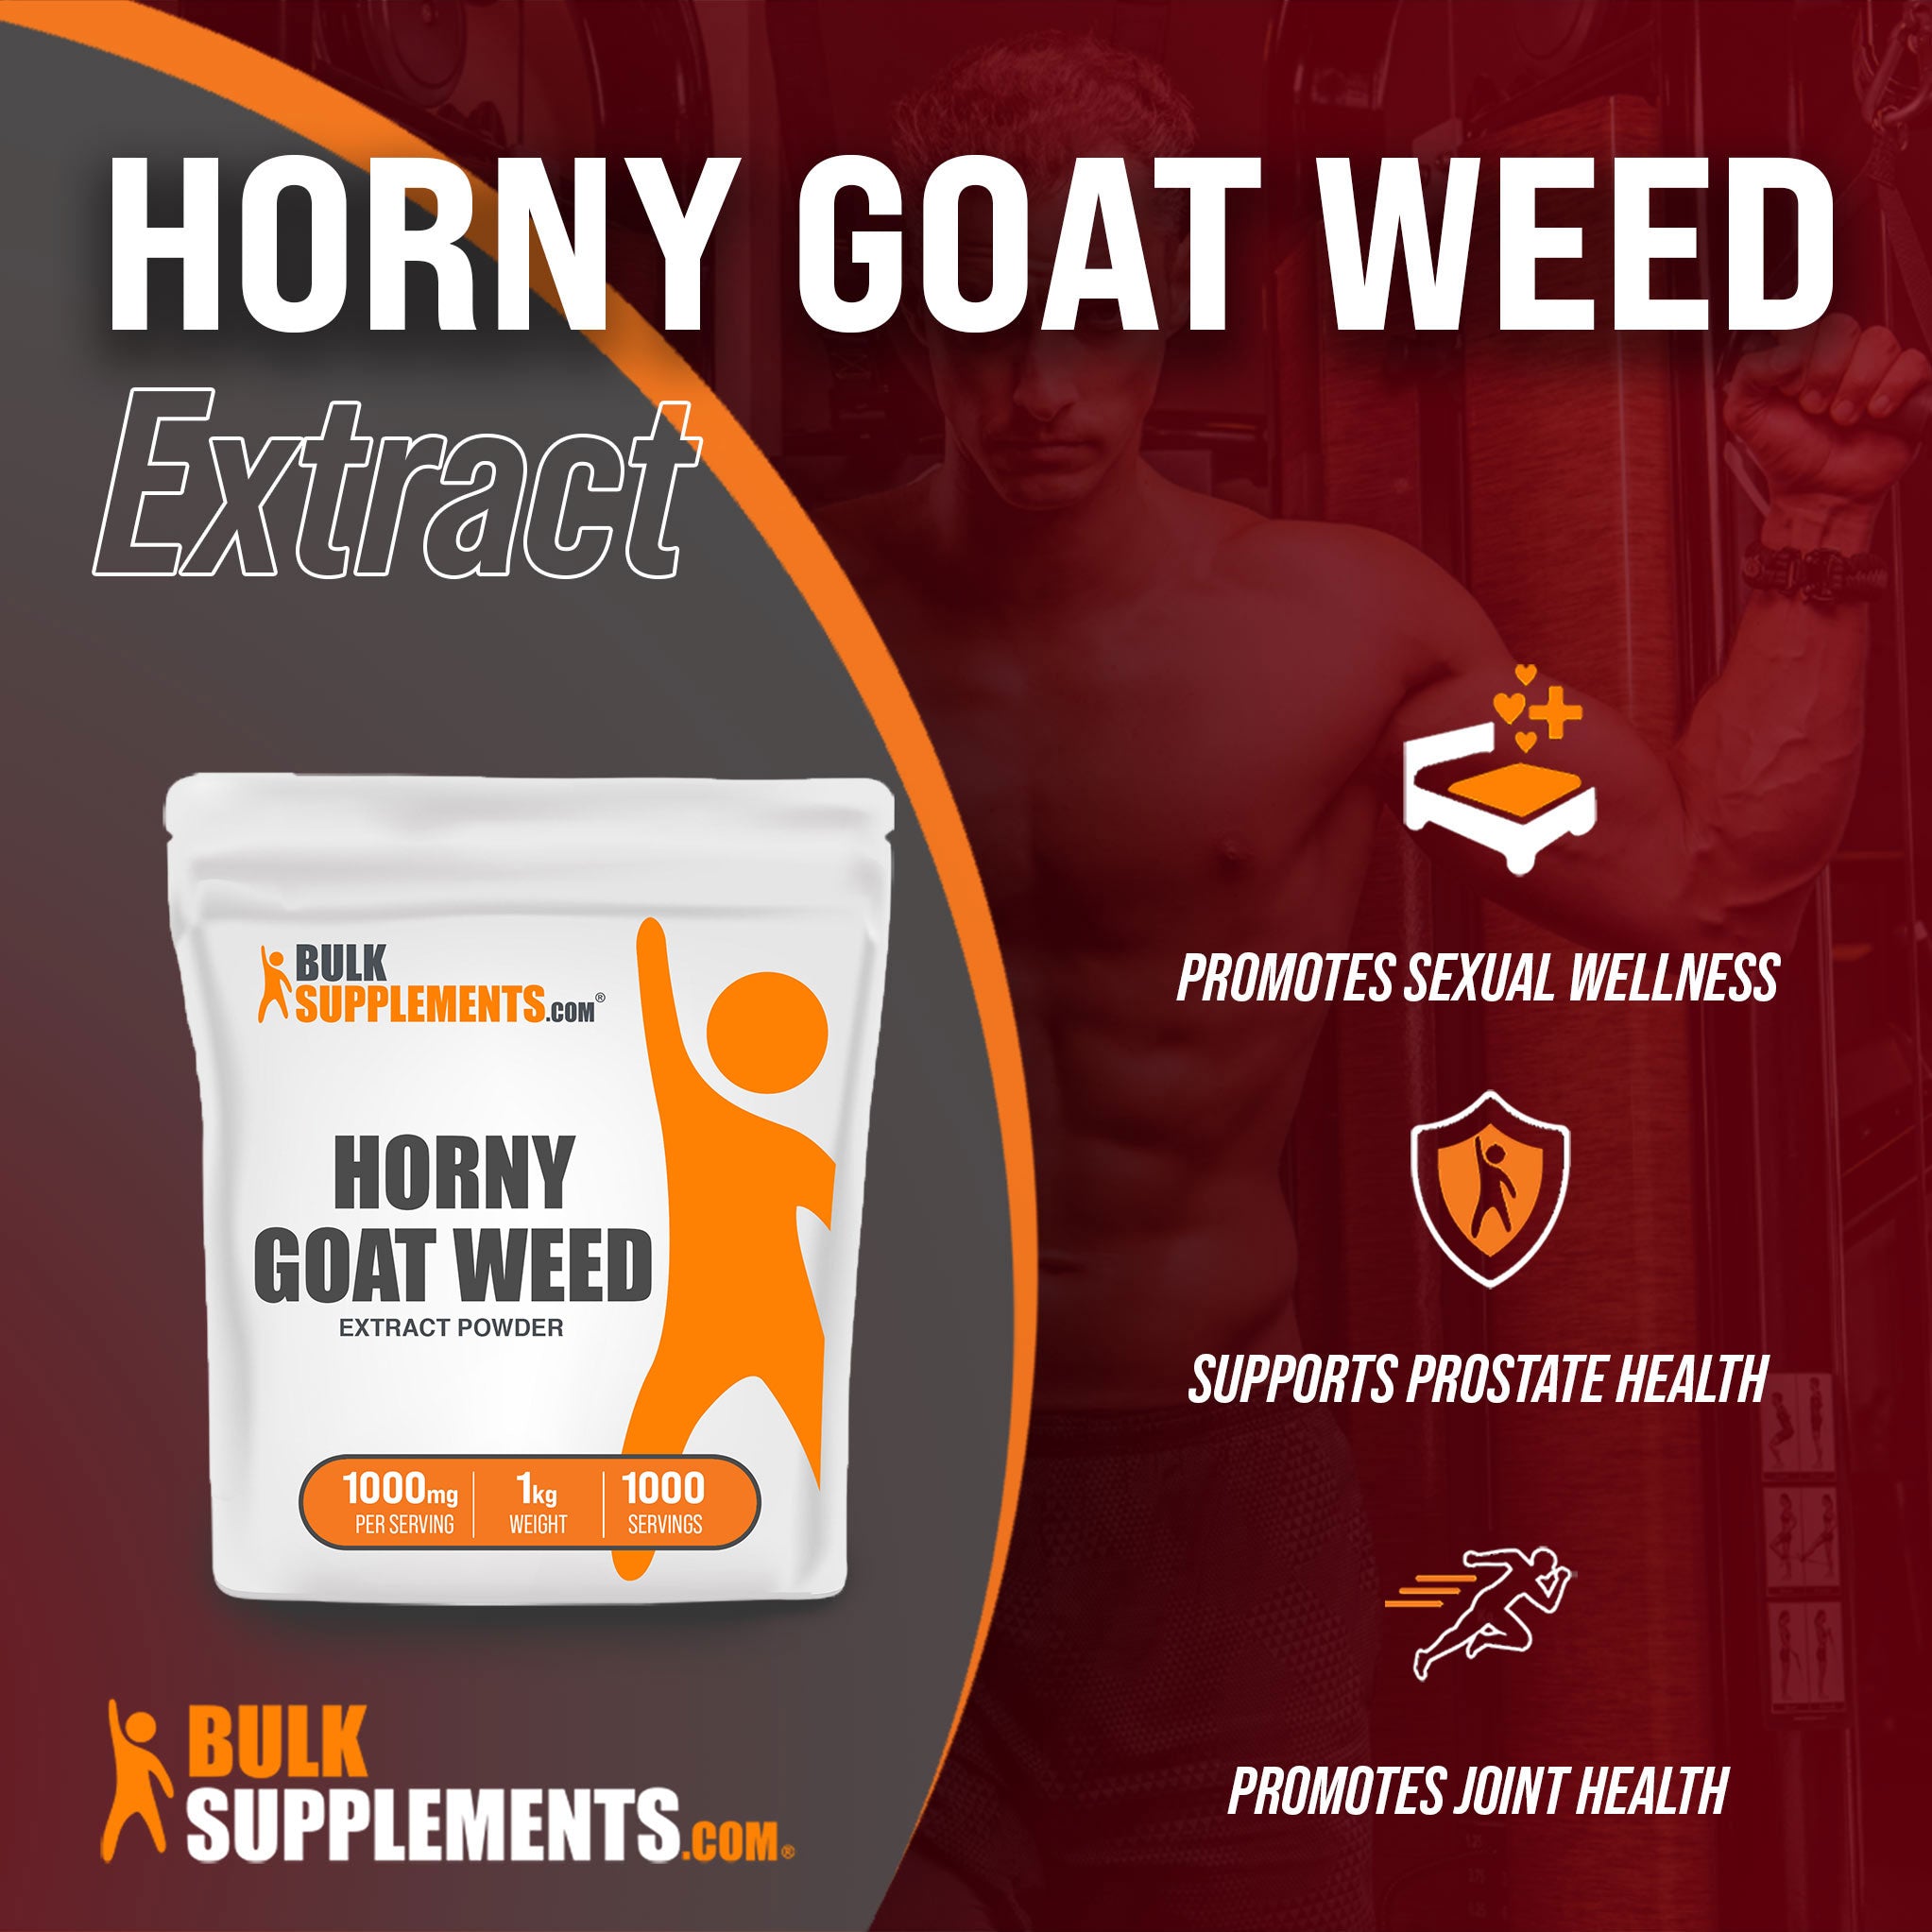 Benefits of Horny Goat Weed Extract; promotes sexual wellness, supports prostate health, promotes joint health